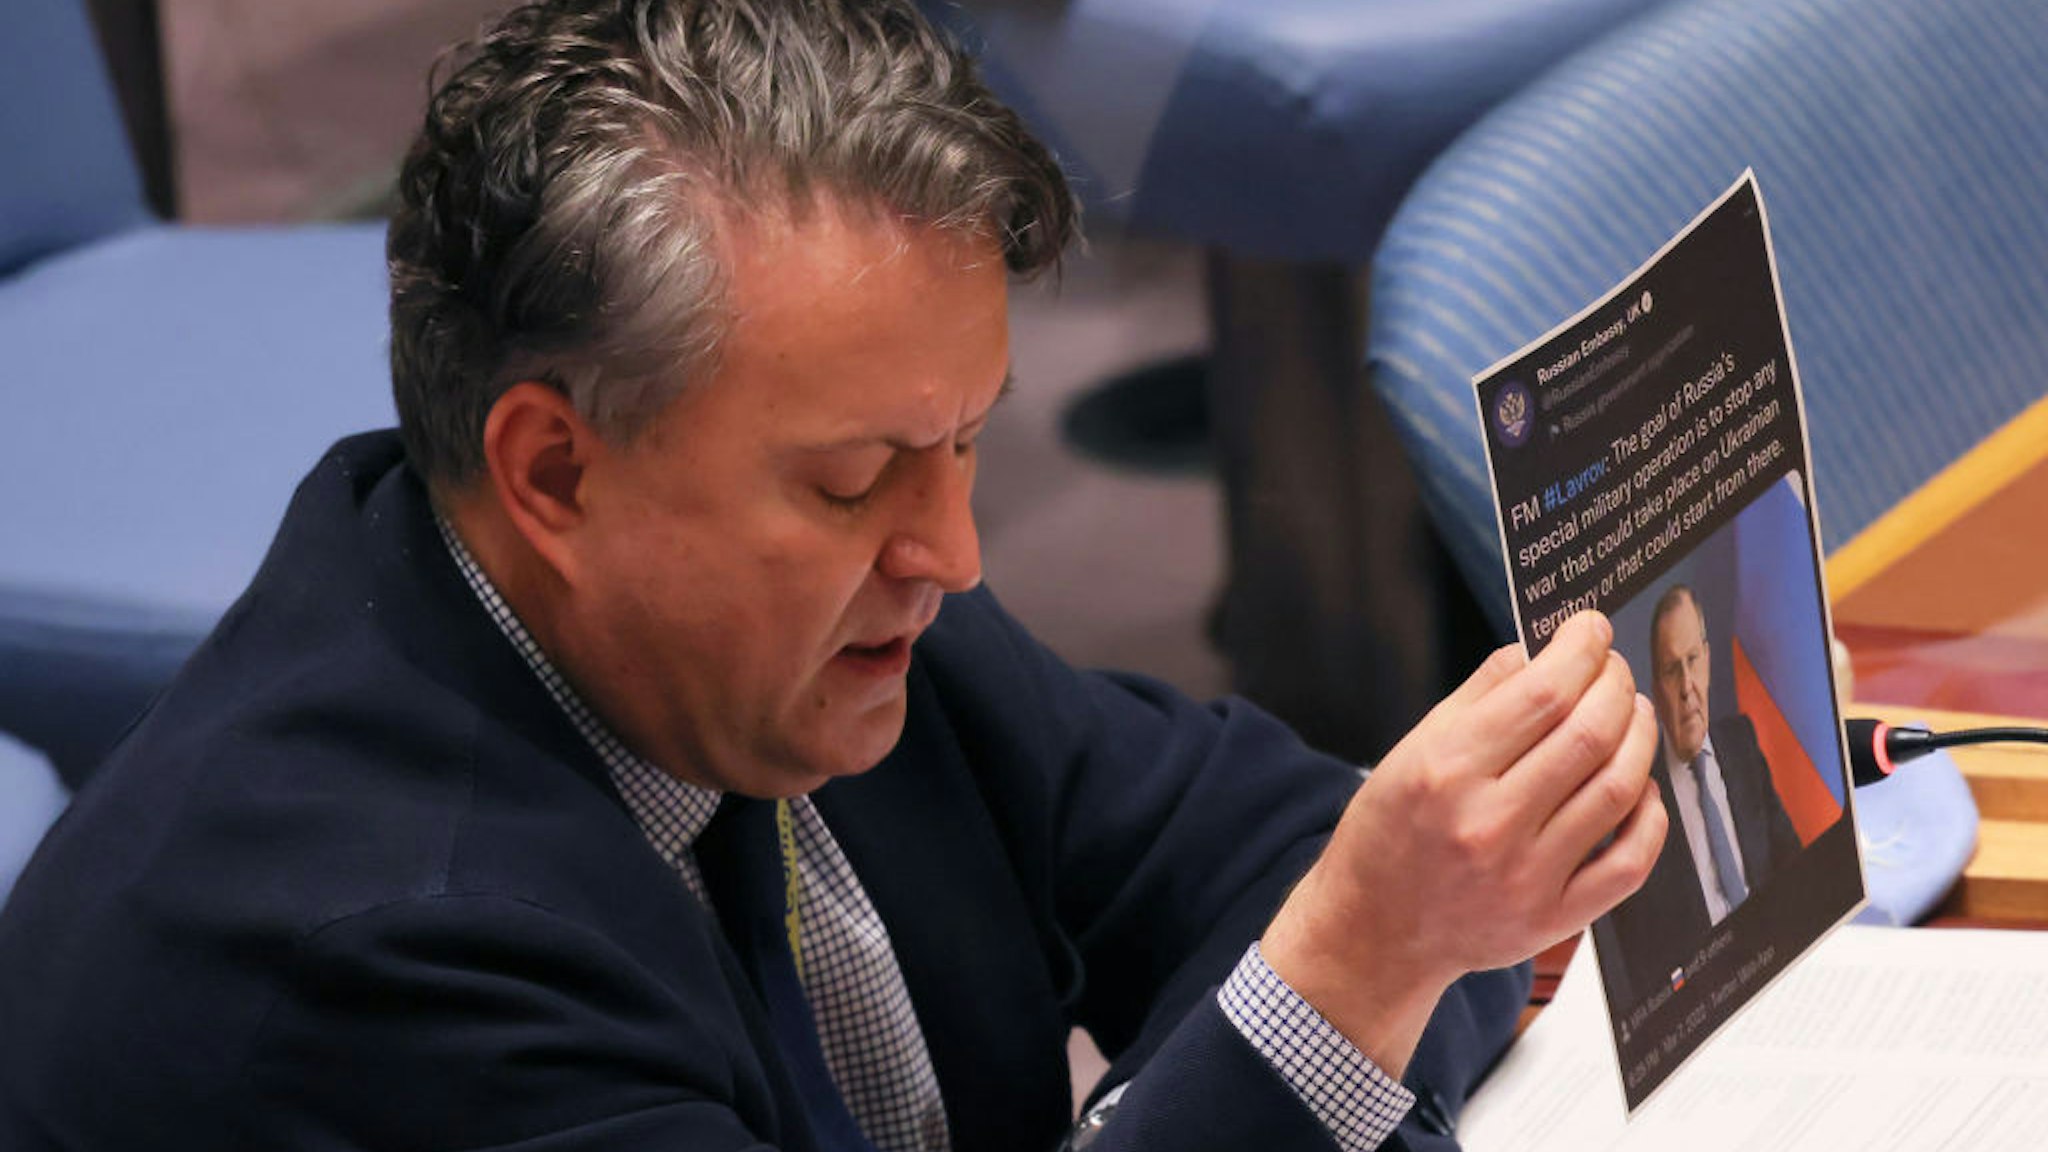 NEW YORK, NEW YORK - MARCH 07: Sergiy Kyslytsya, United Nations permanent representative of Ukraine, holds up a printout of a retweet of Russian Foreign Minister Sergei Lavrov, during a speech to the U.N. Security Council in a meeting to discuss the humanitarian crisis in Ukraine at U.N. headquarters on March 07, 2022 in New York City. The body met as Russia's invasion of Ukraine continues. Yesterday, a mortar shell fired by Russian forces killed a family of four in the city of Irpin as they fled the fighting. Russian President Vladimir Putin has denied that soldiers are targeting civilians fleeing combat zones. (Photo by Michael M. Santiago/Getty Images)